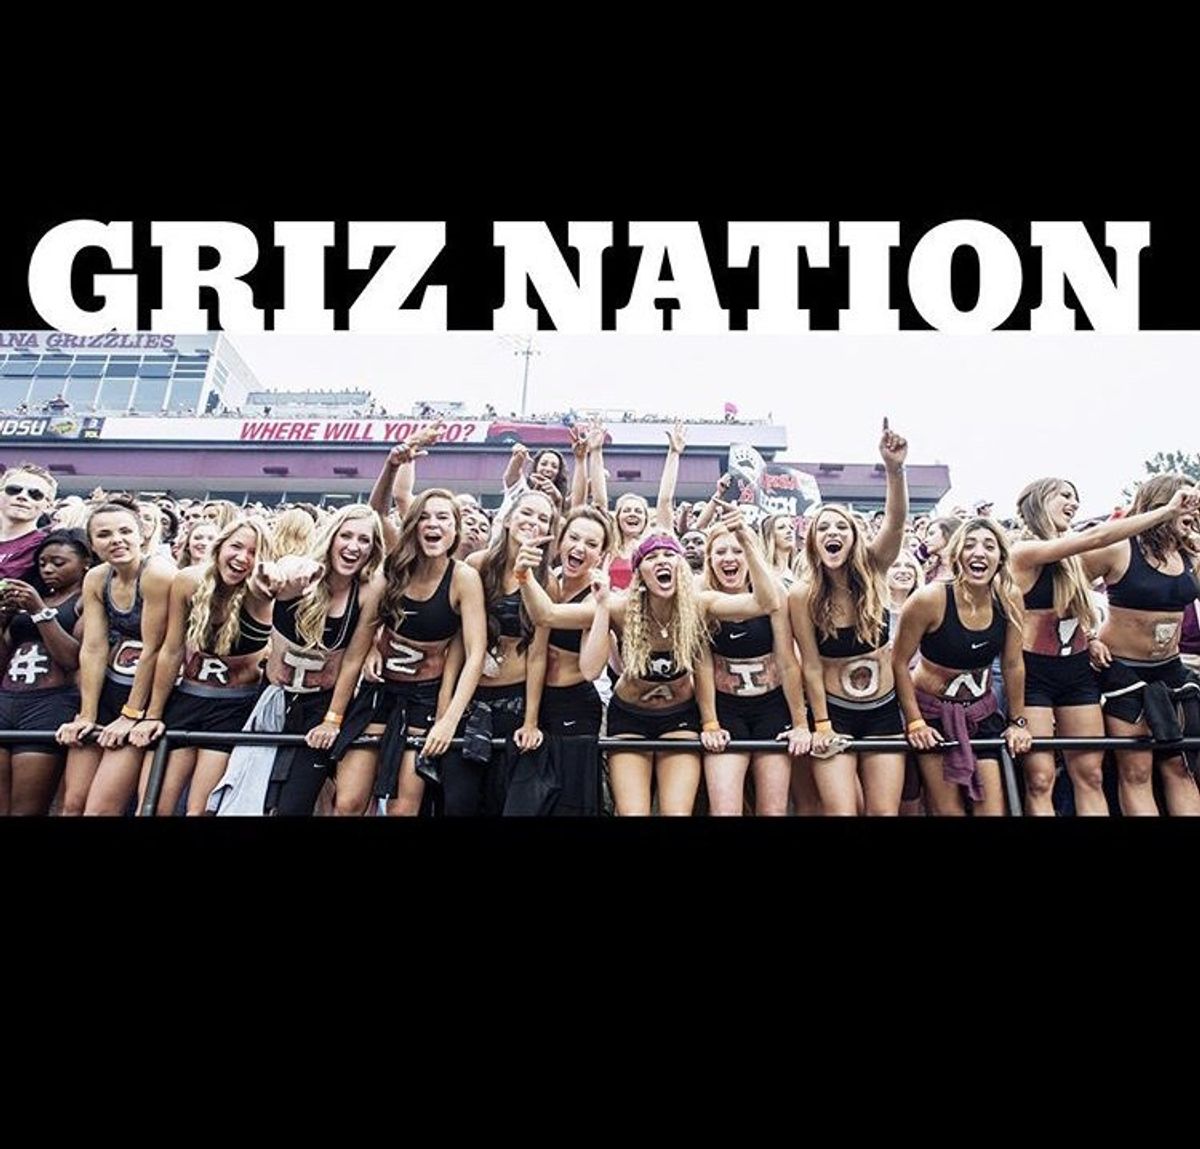 The Community That Is: Griz Nation